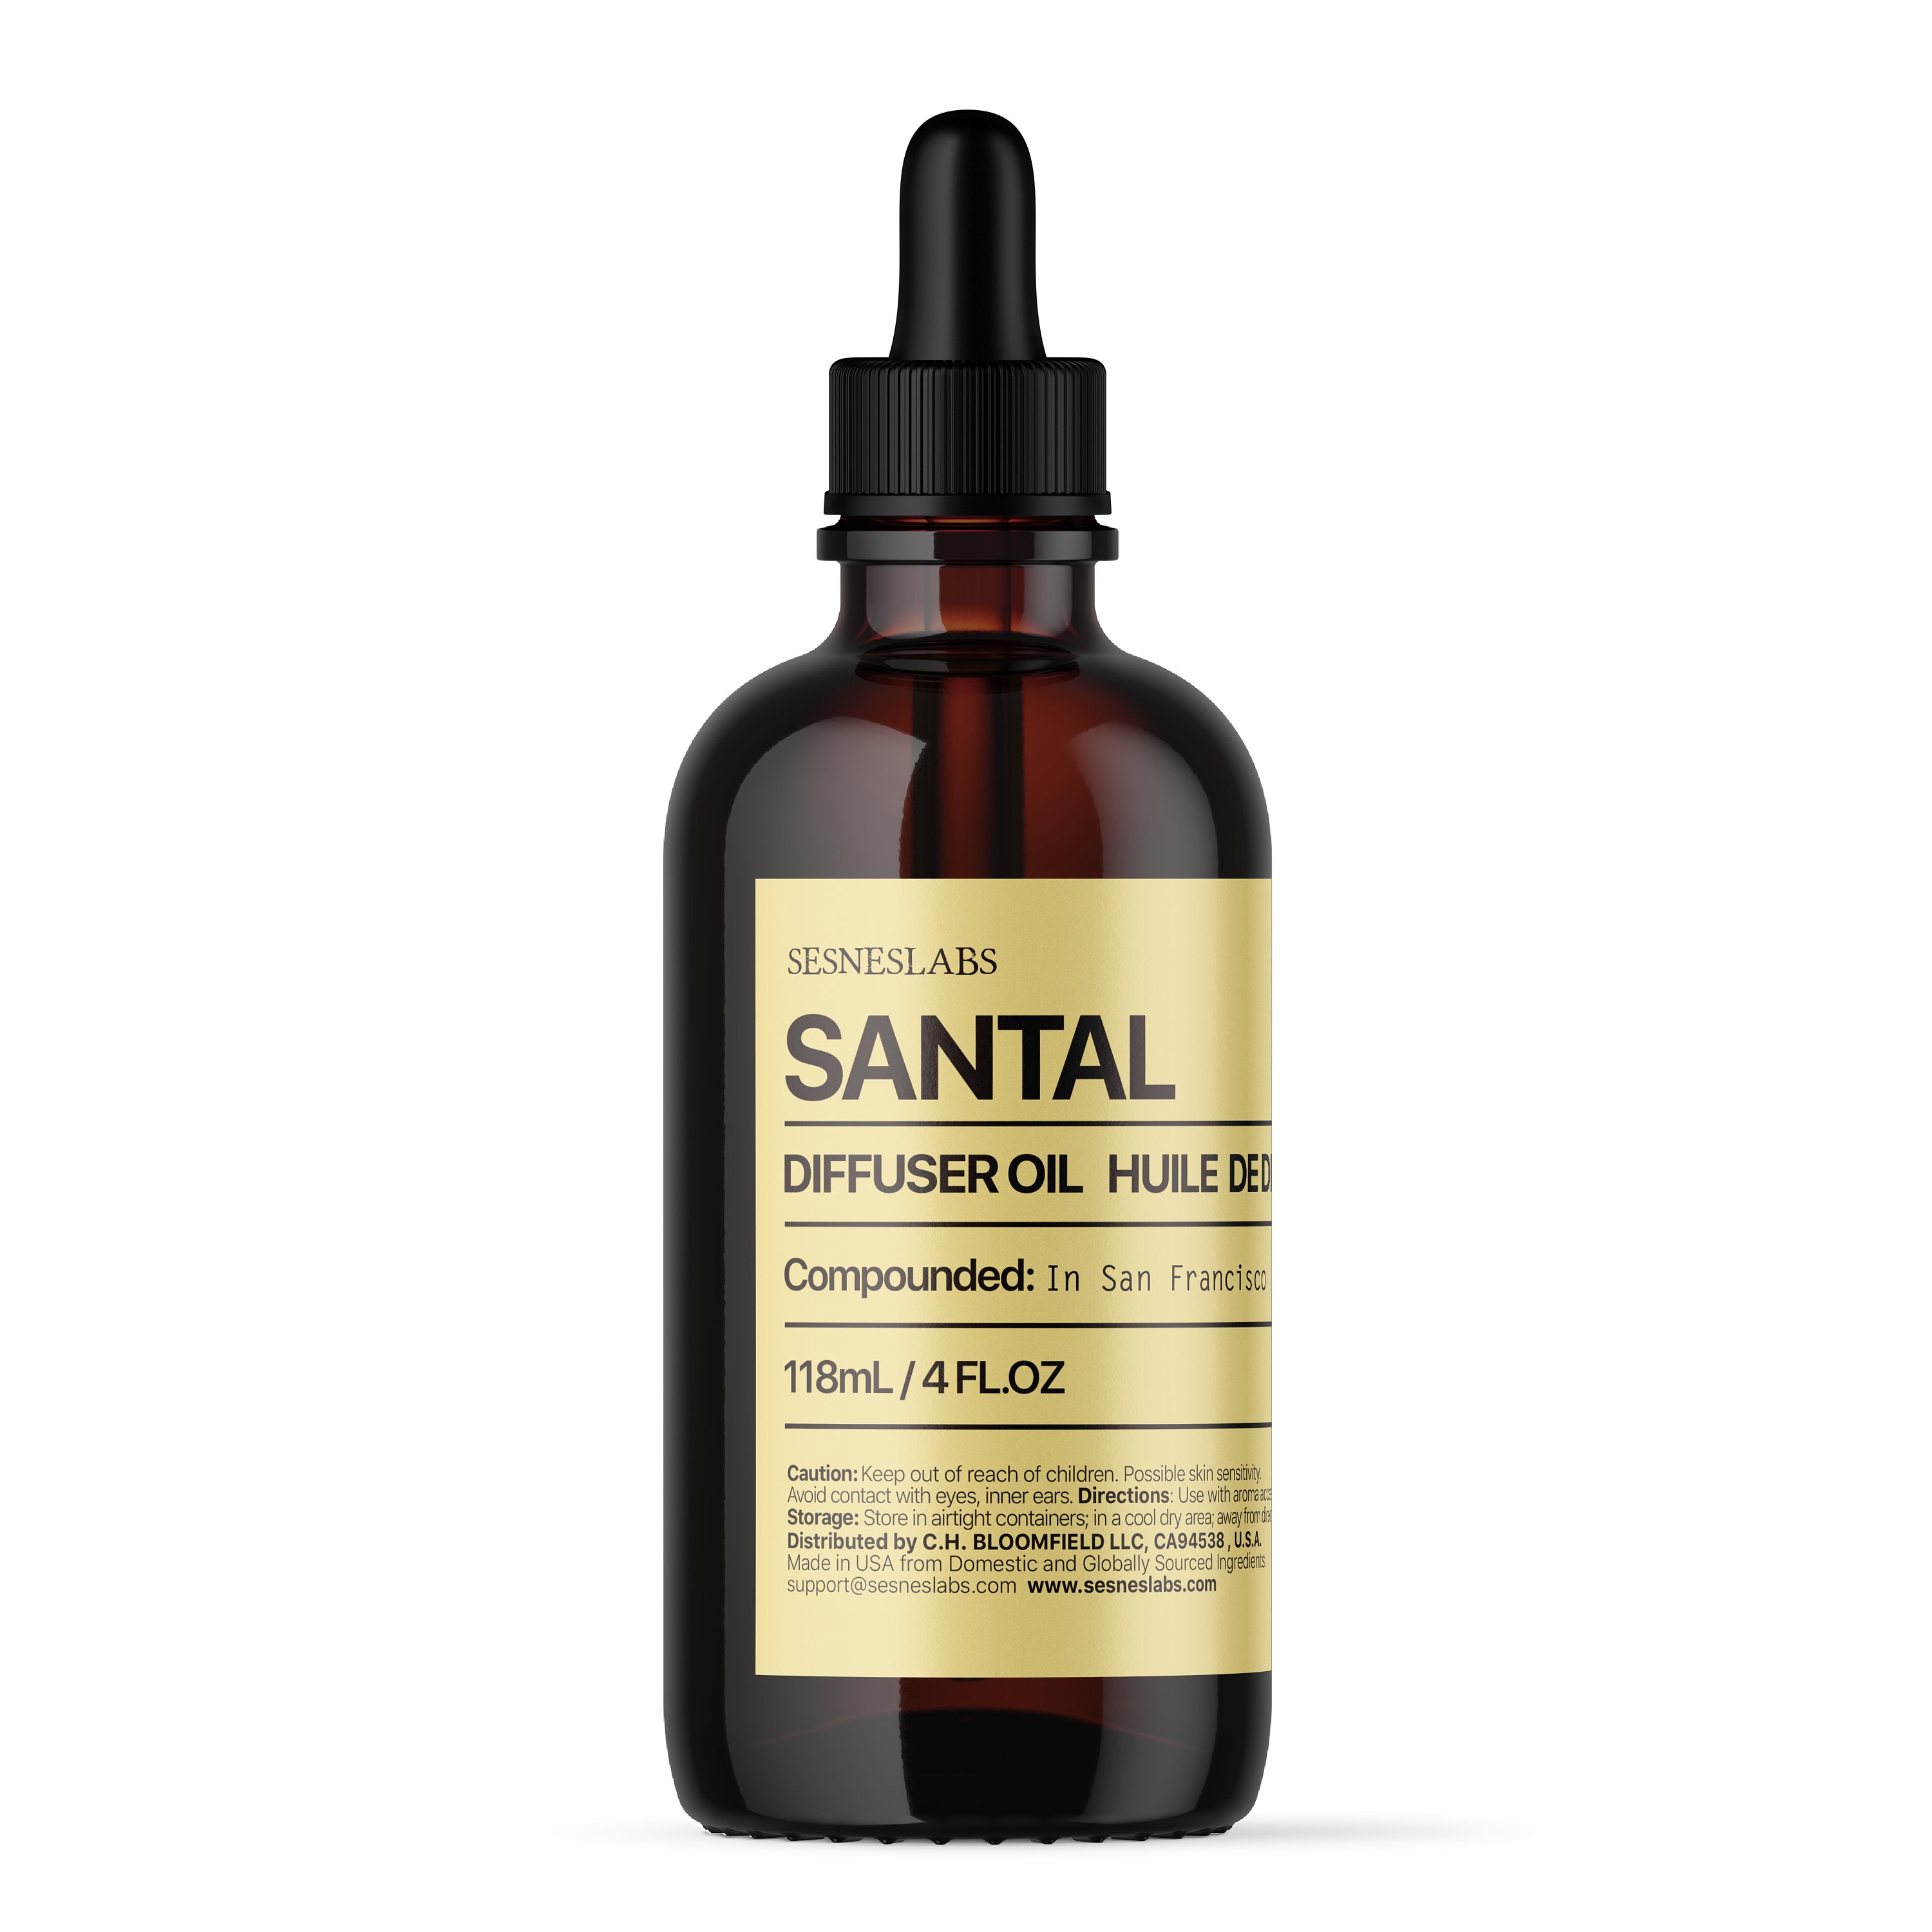 Nuescent Santal Diffuser Oil - Santal Essential Oil Blend for Scent Diffusers - Santal Oil - Sandalwood, Cardamom Cedarwood Notes - Suitable for